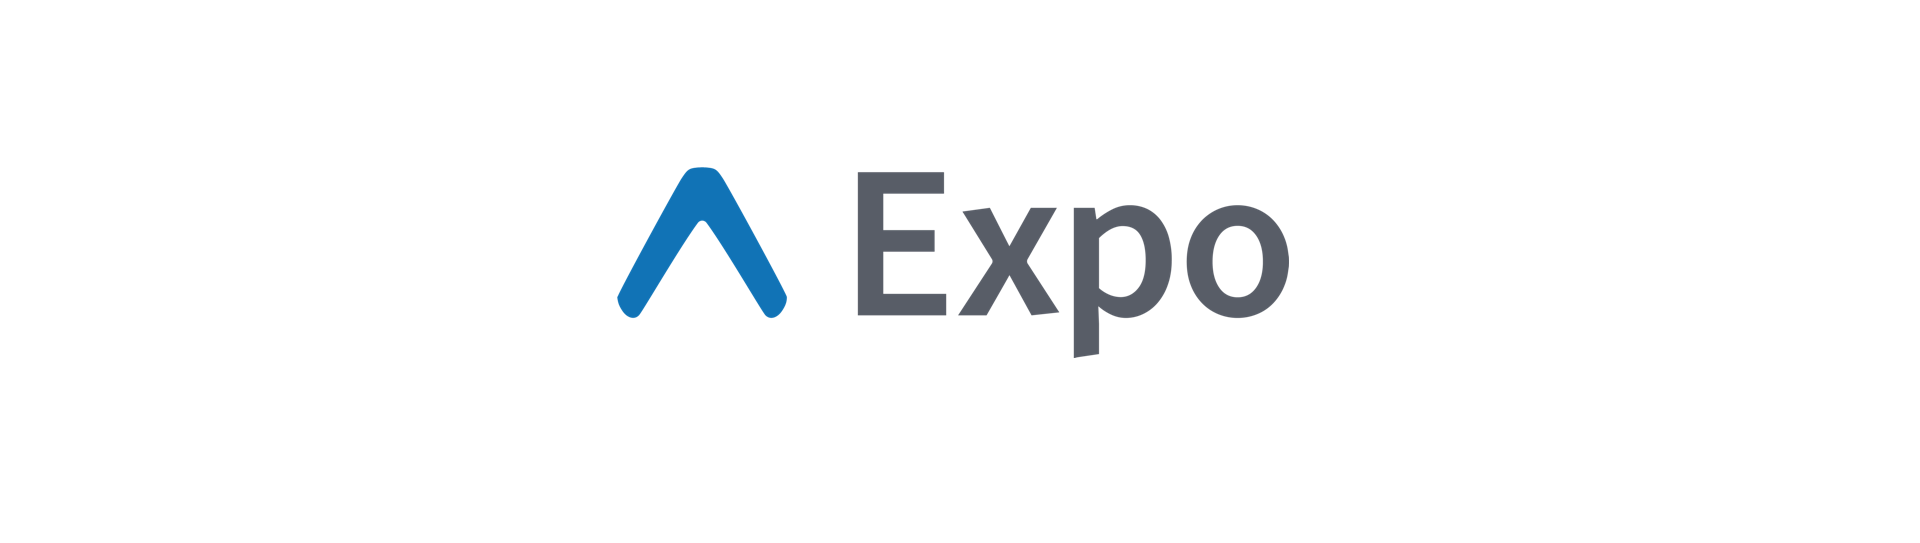 Expoロゴ